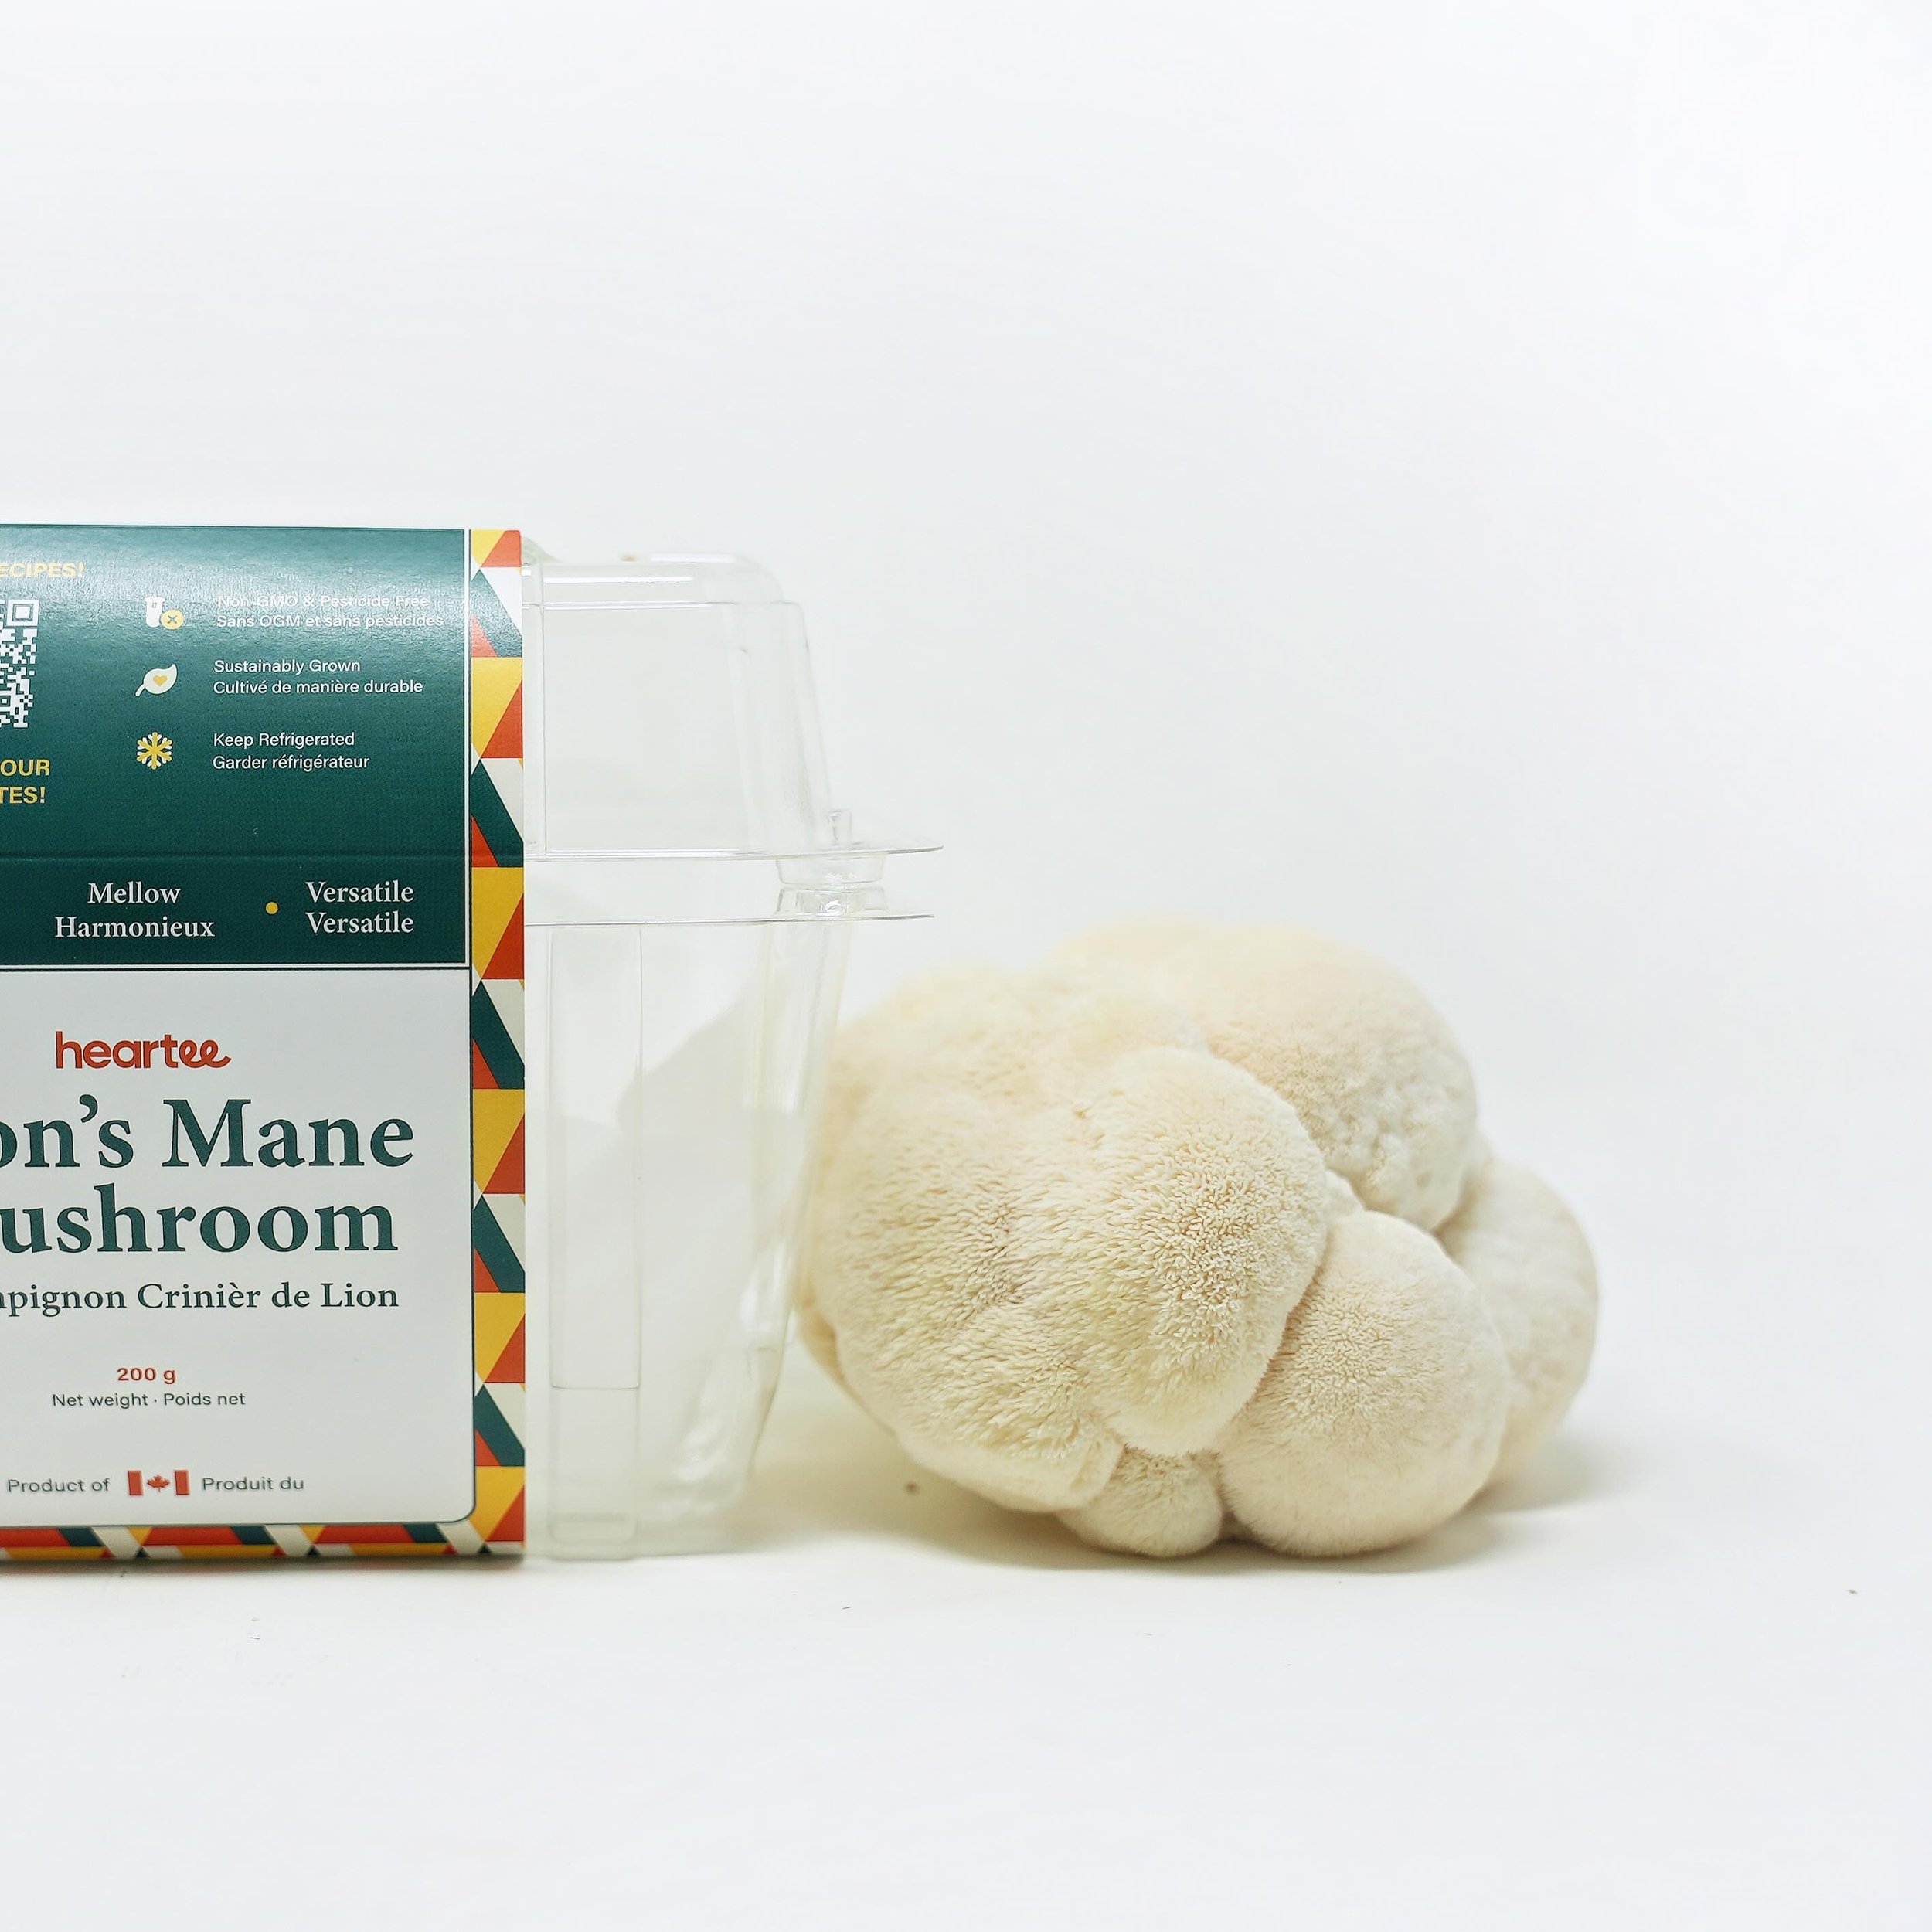 From our farm to your fork within an hour&hellip;

#fresh #mushrooms